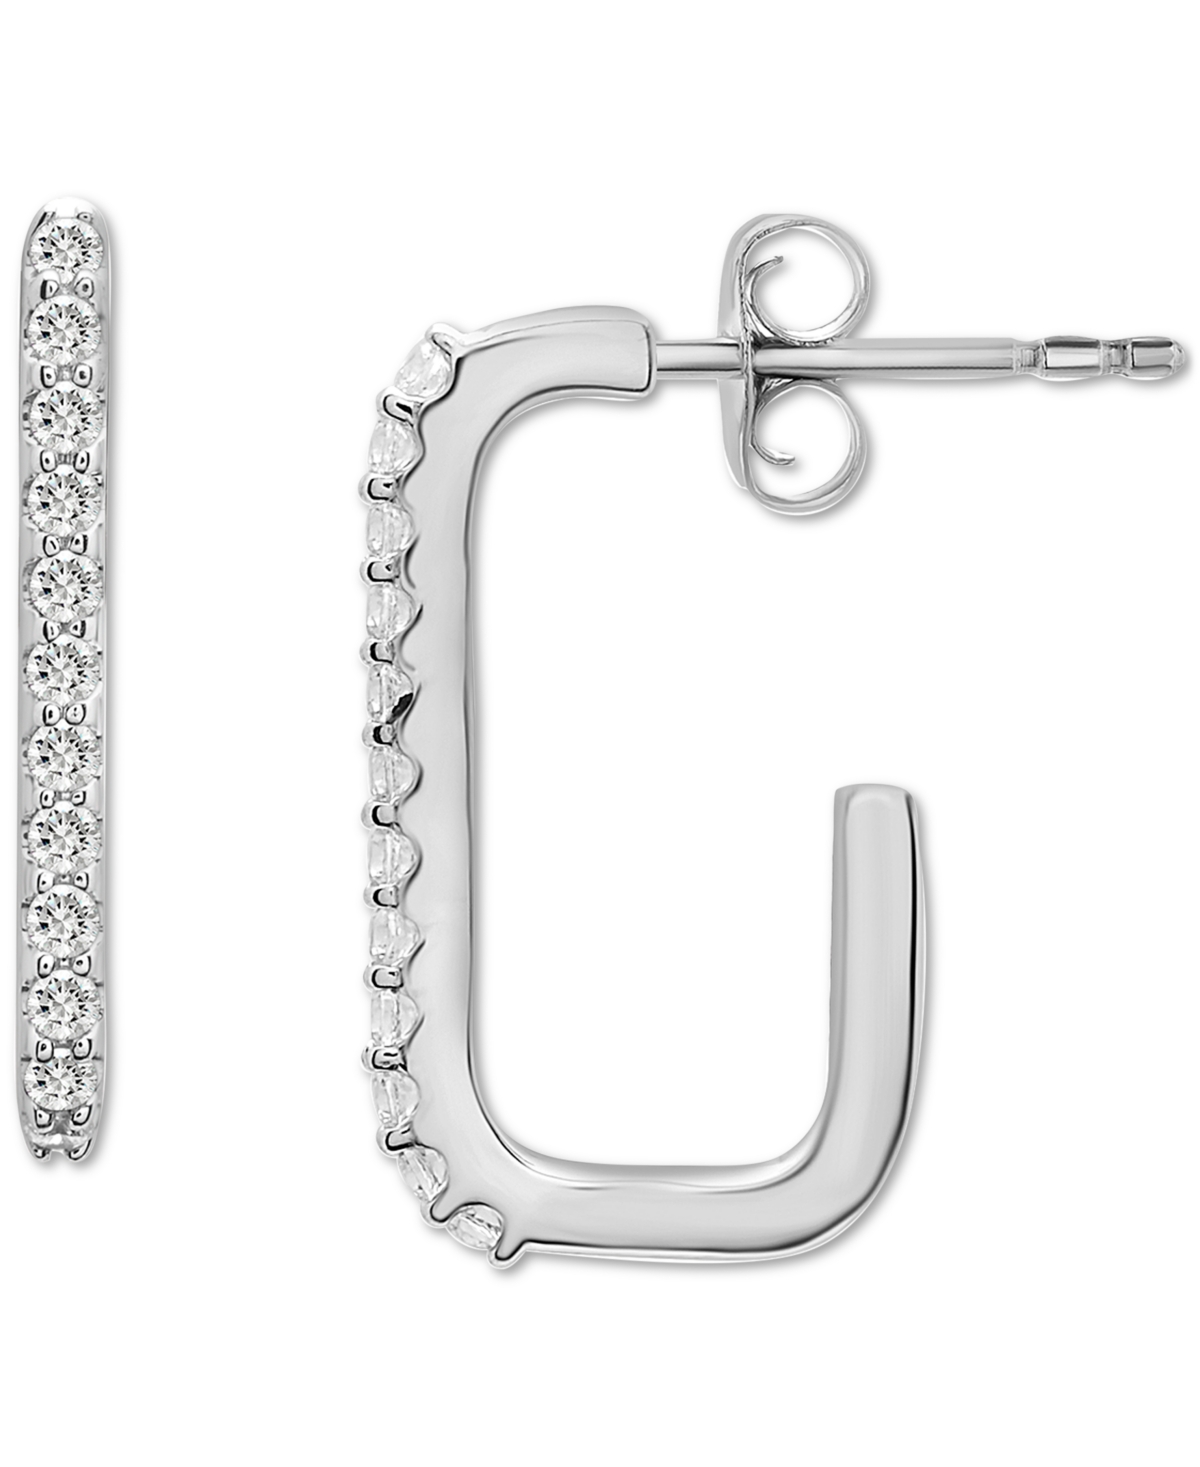 Diamond Squared Open Hoop Earrings (1/6 ct. t.w.) in 14k White Gold, Created for Macy's - White Gold